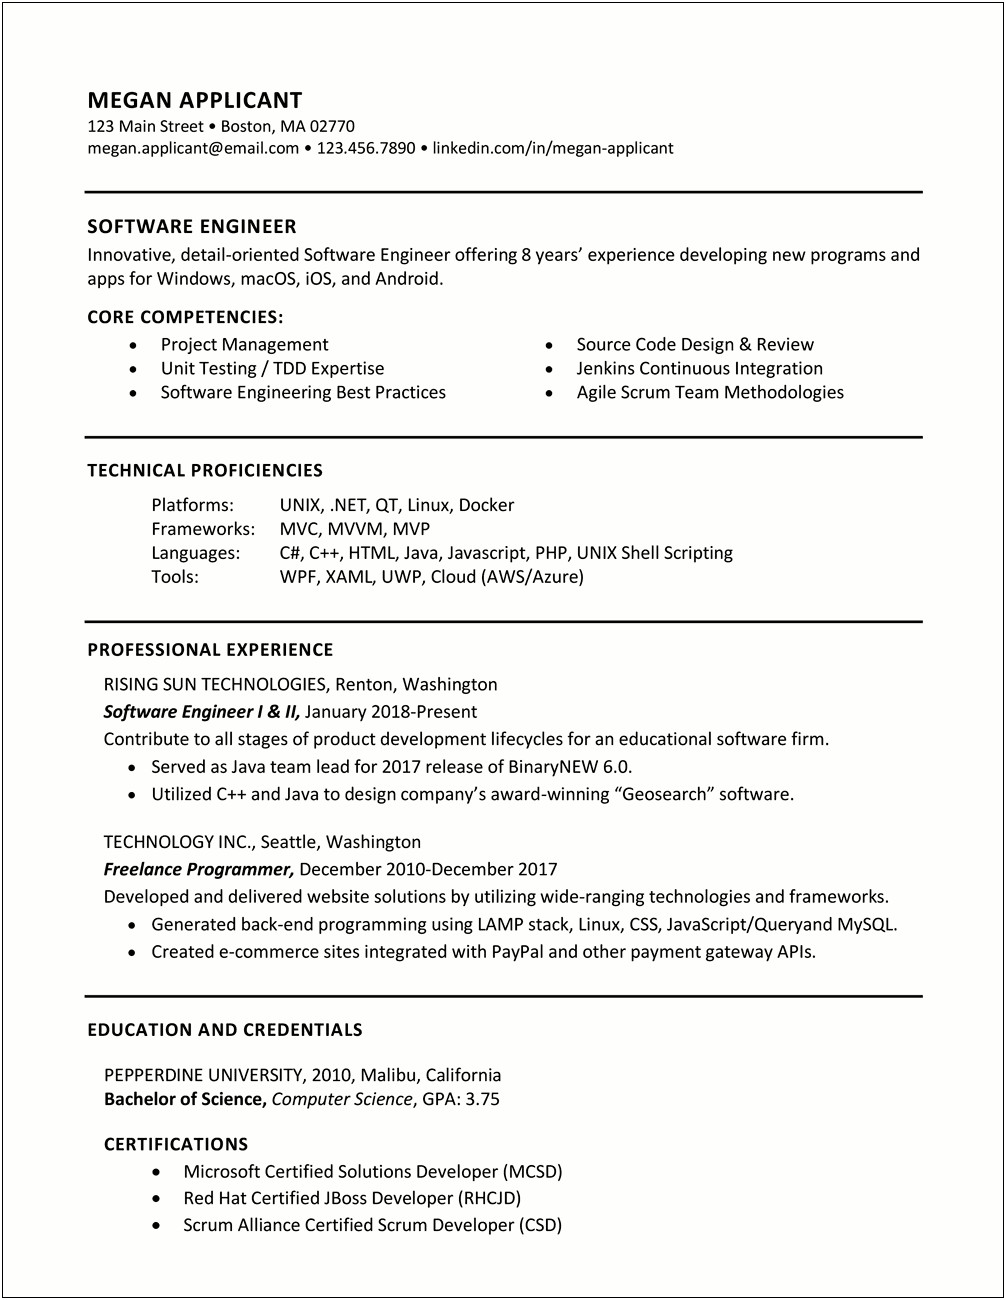 Examples Of Technical Skills For Resumes